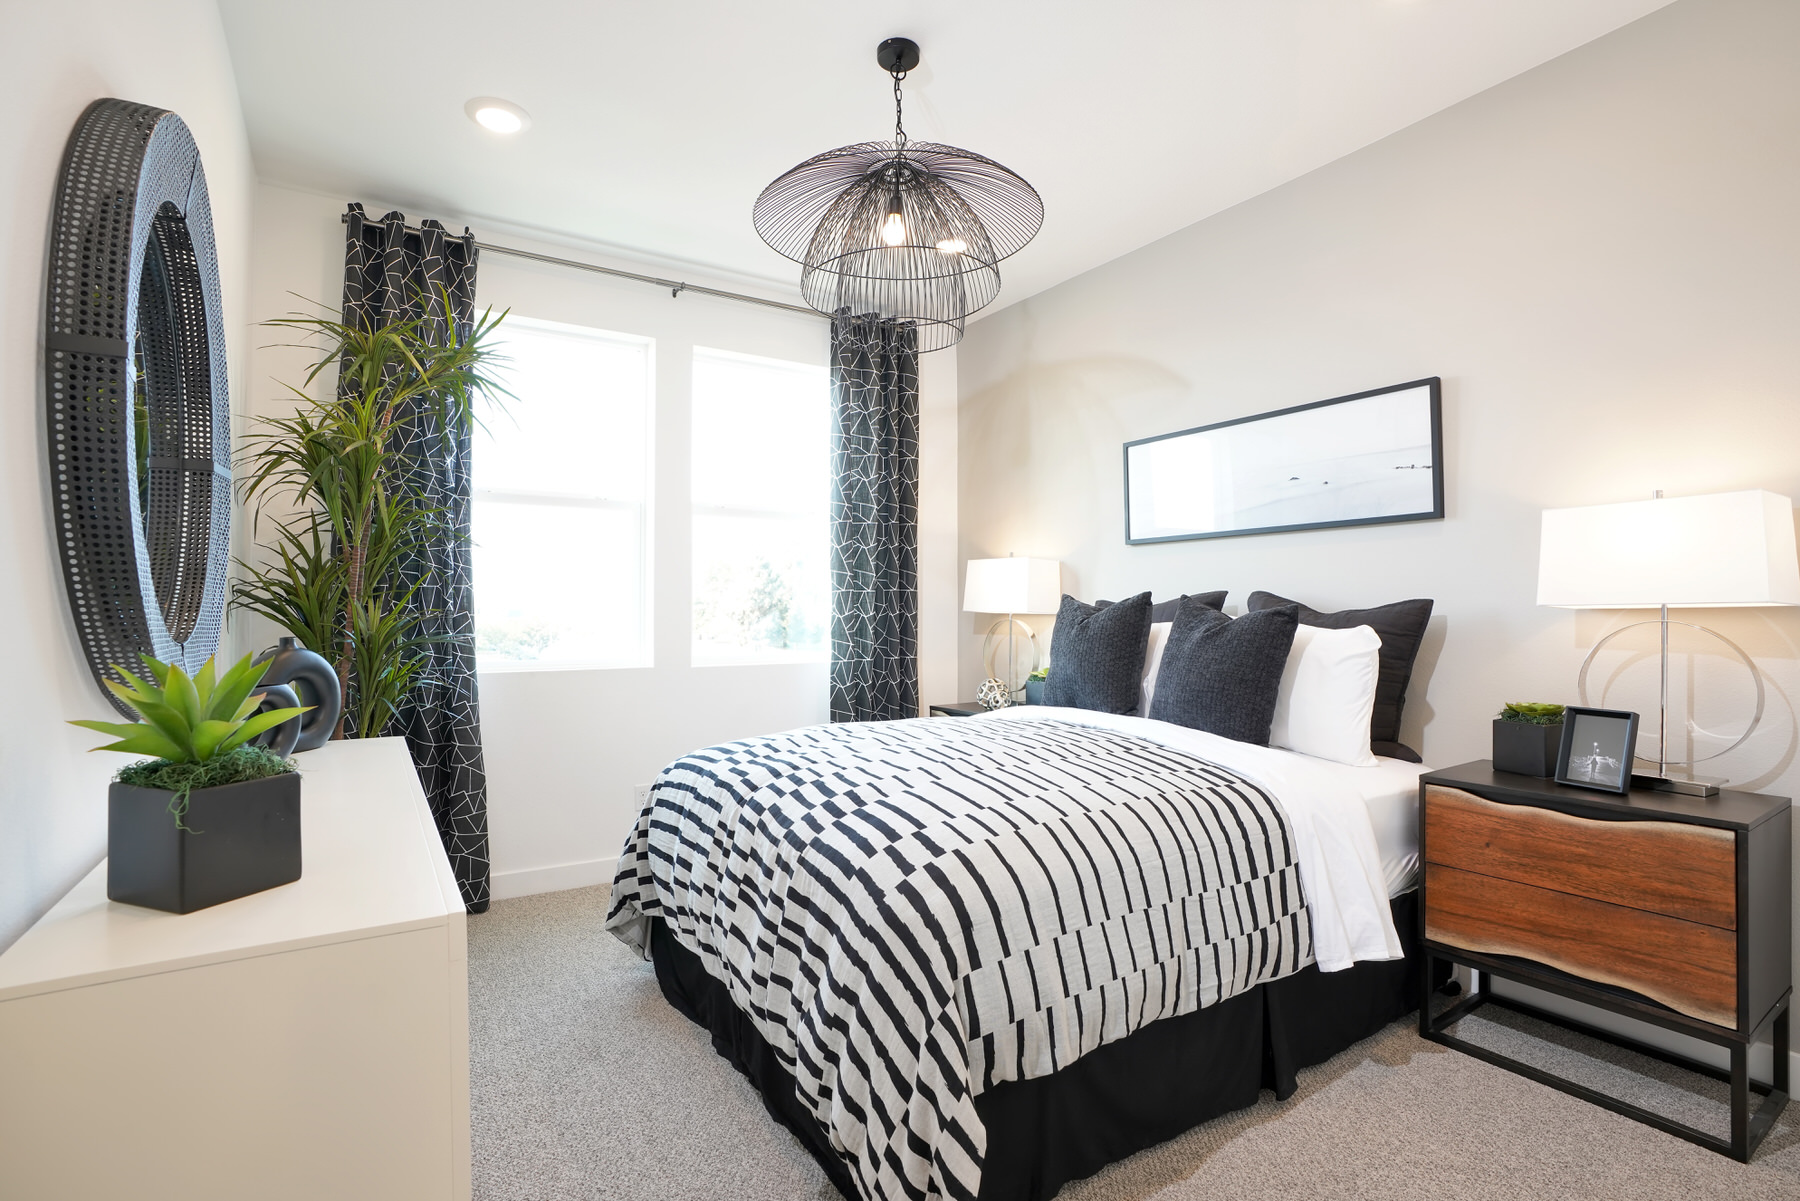 Bedroom 2 in Plan 1 at Townes at Magnolia by Melia Homes in Anaheim, CA